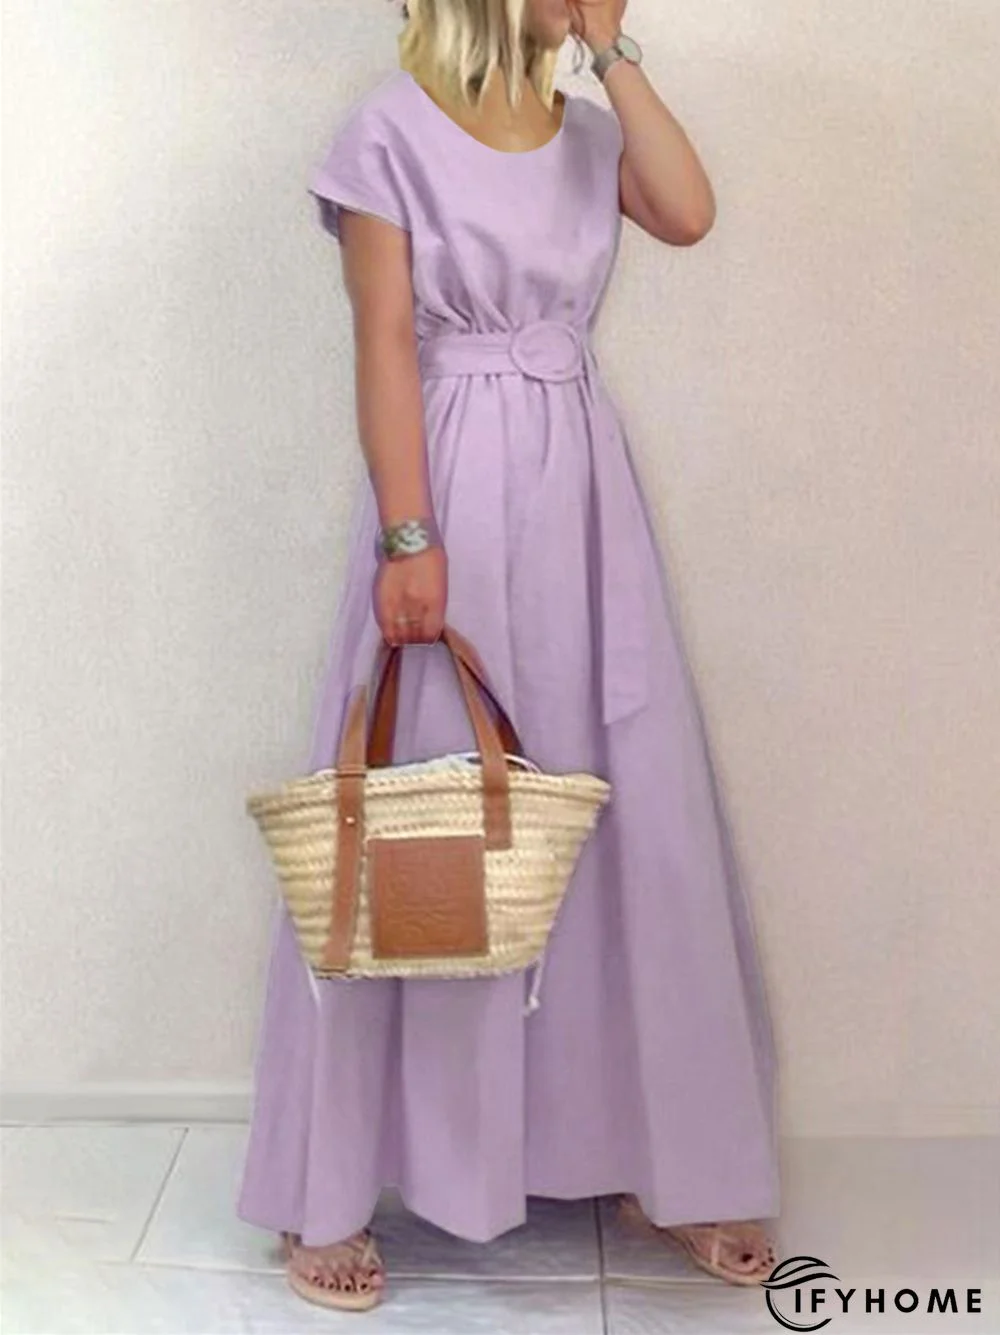 New Long Skirt Round Neck Solid Belt Large Dress | IFYHOME